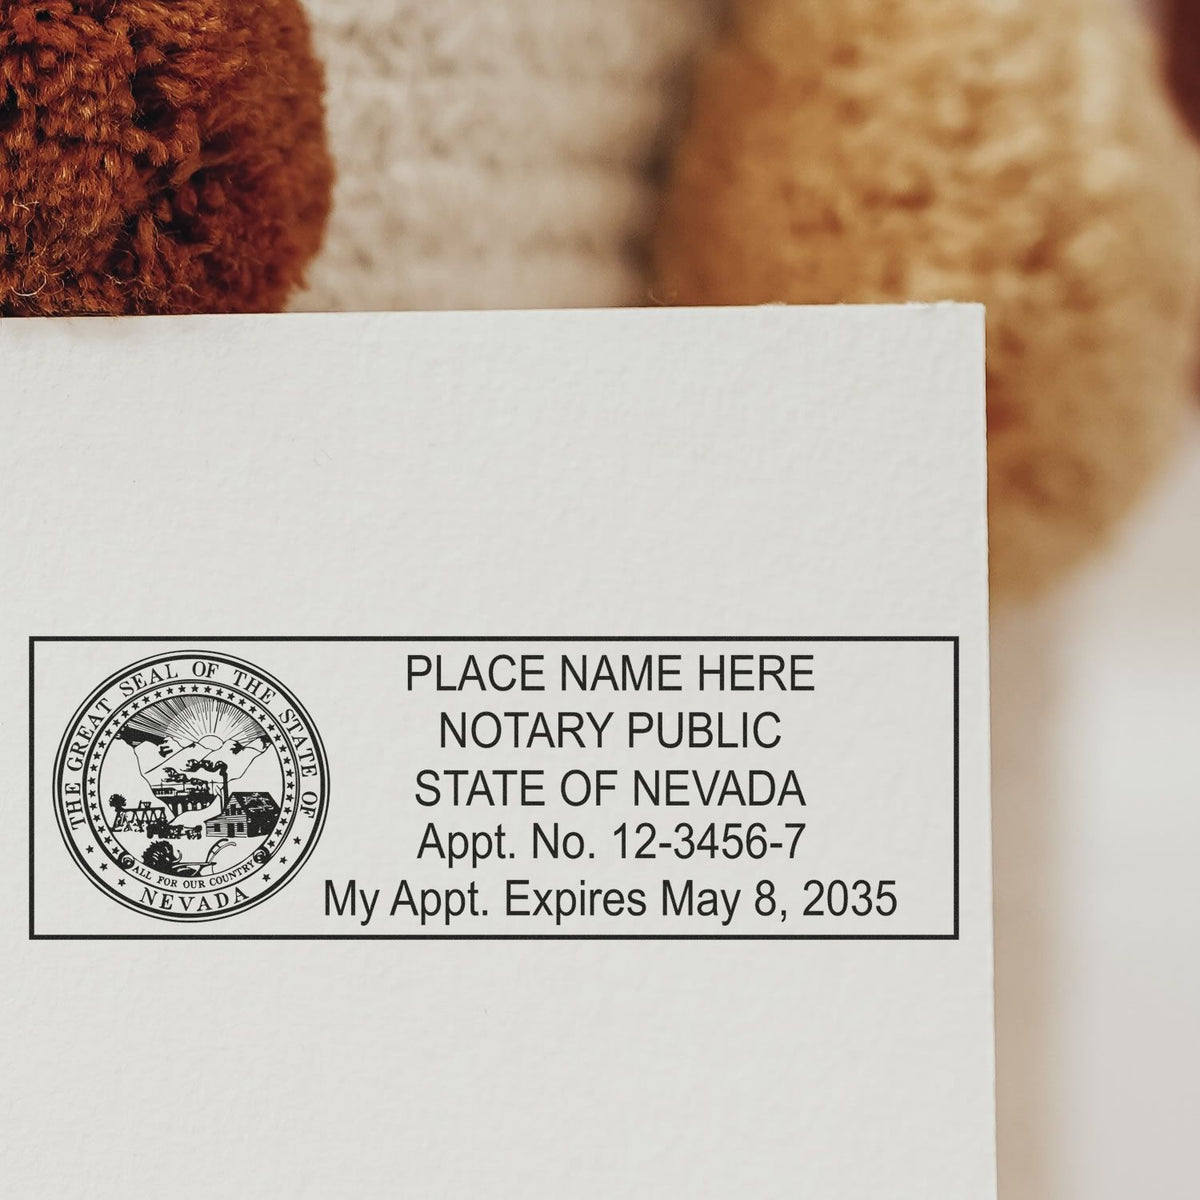 A lifestyle photo showing a stamped image of the MaxLight Premium Pre-Inked Nevada State Seal Notarial Stamp on a piece of paper